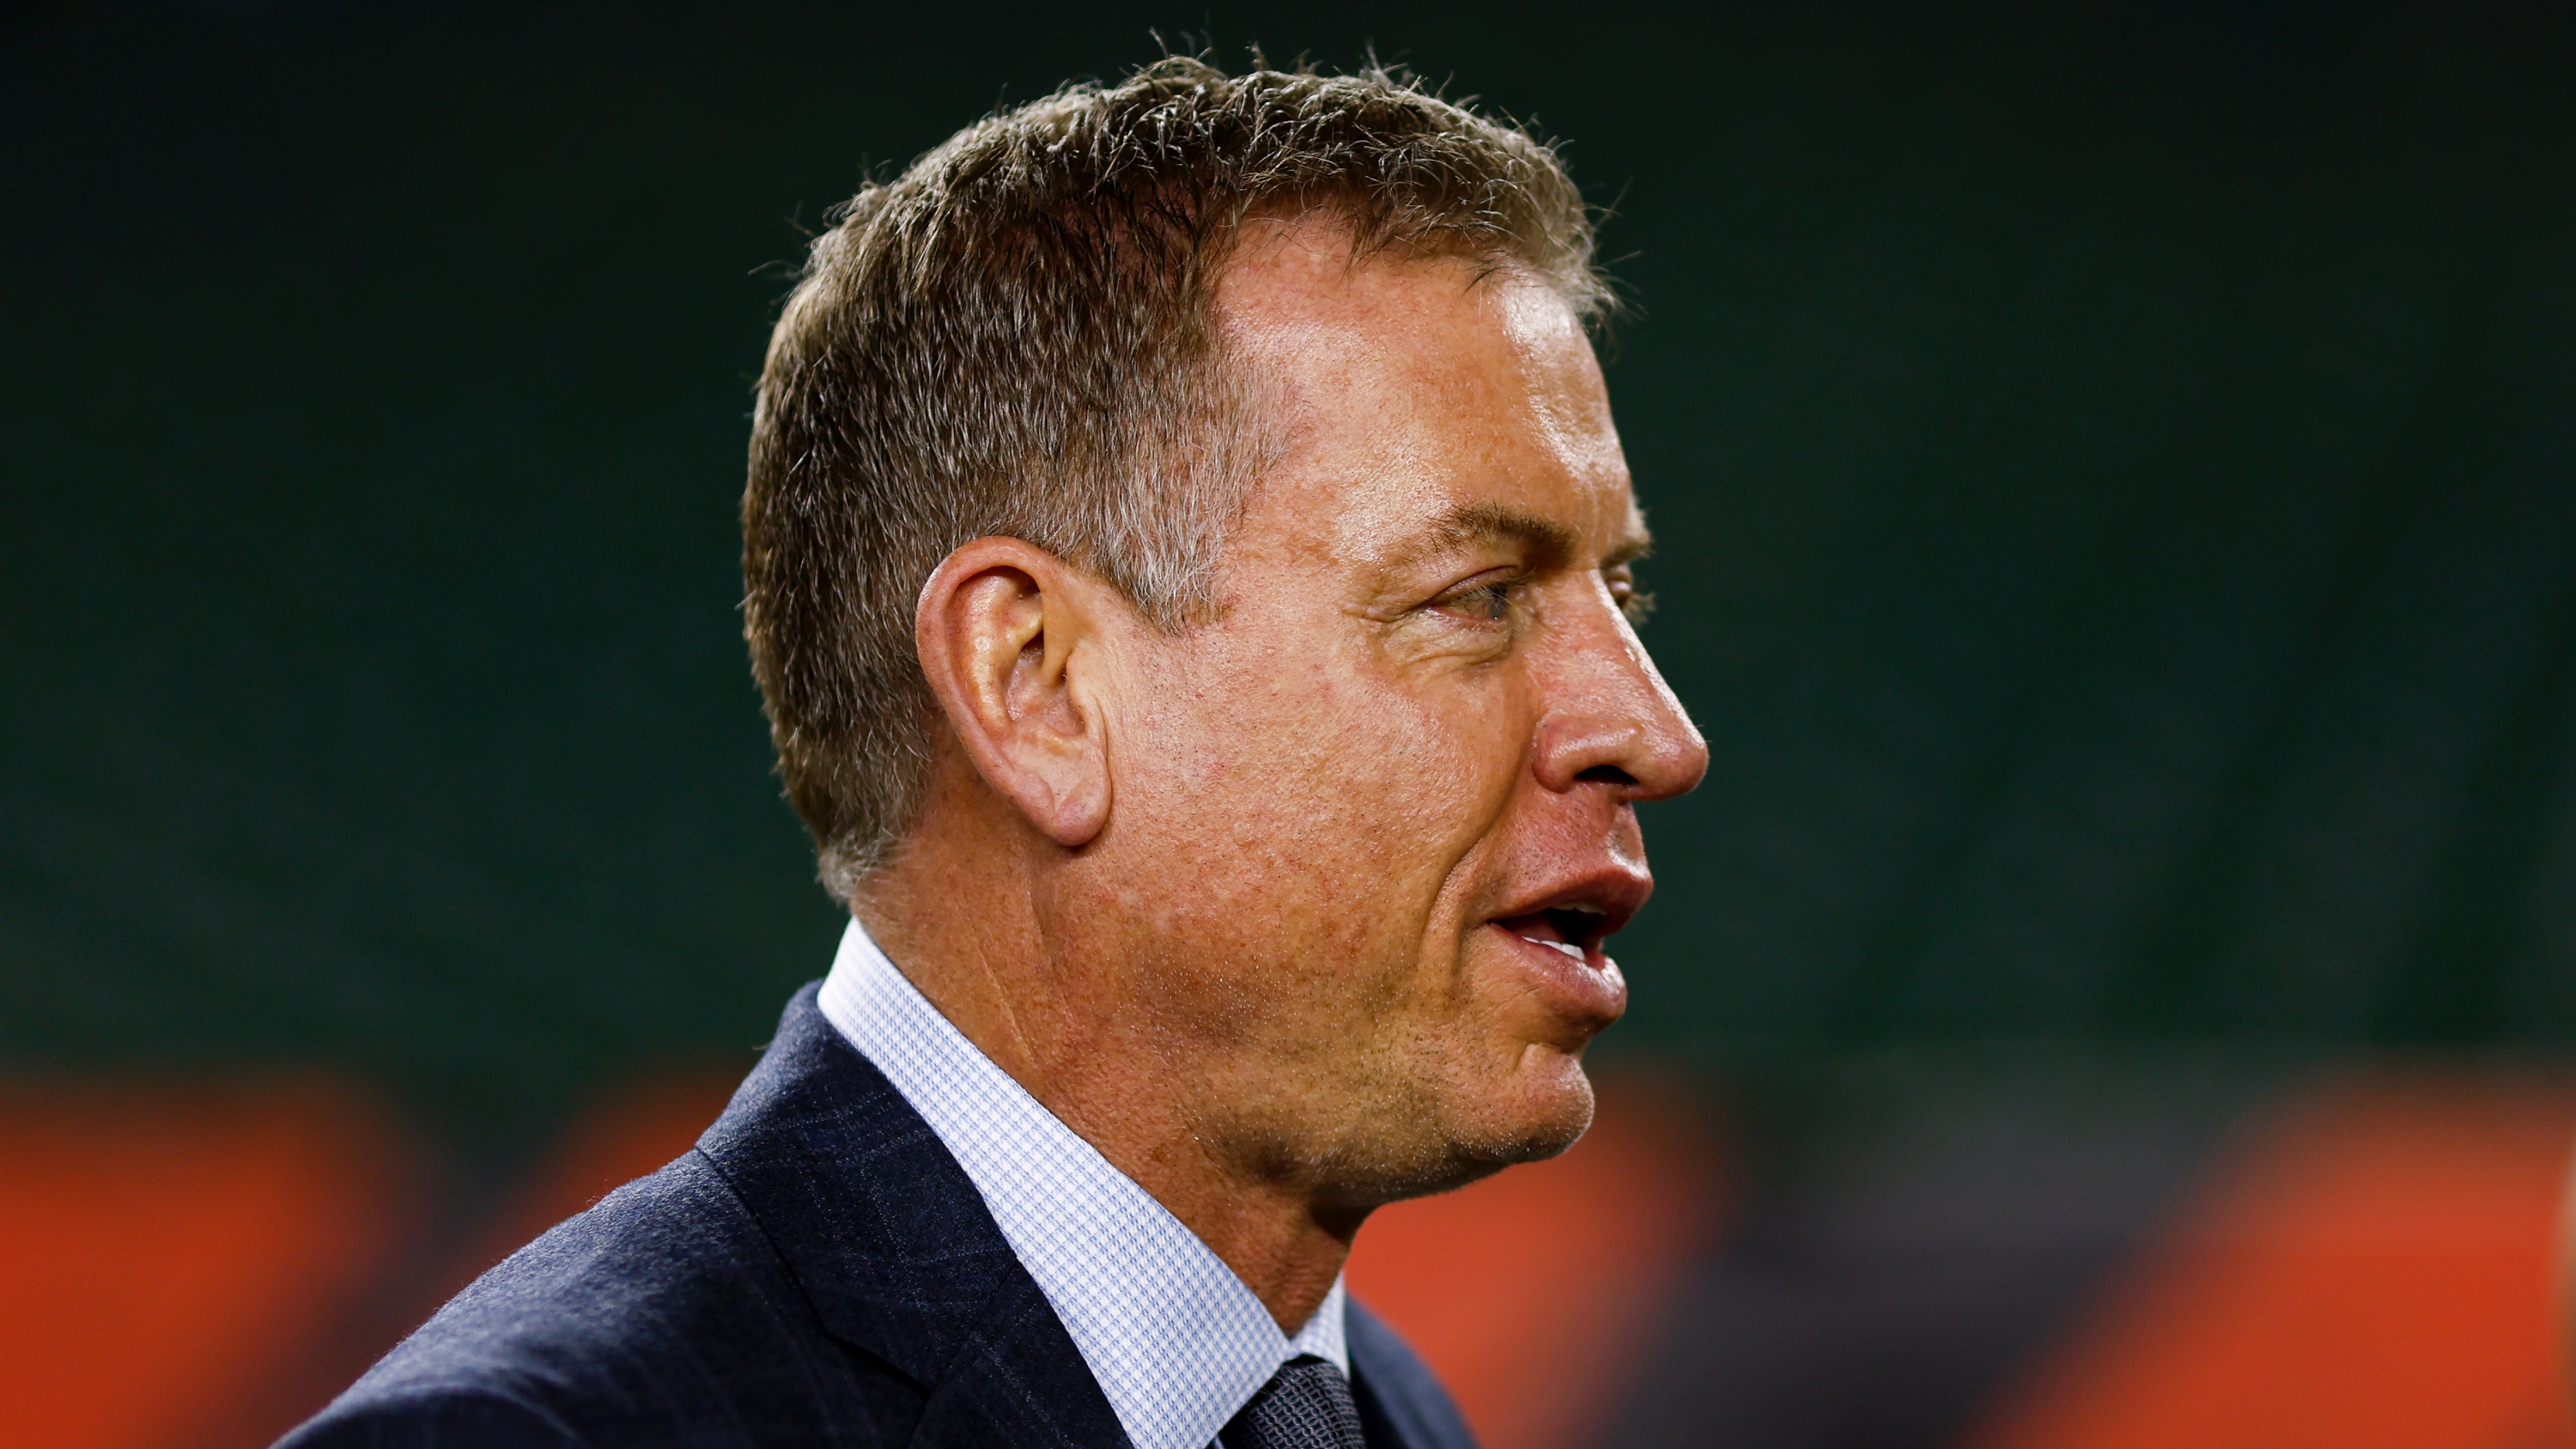 Troy Aikman claims he invented NFL Pro Bowl